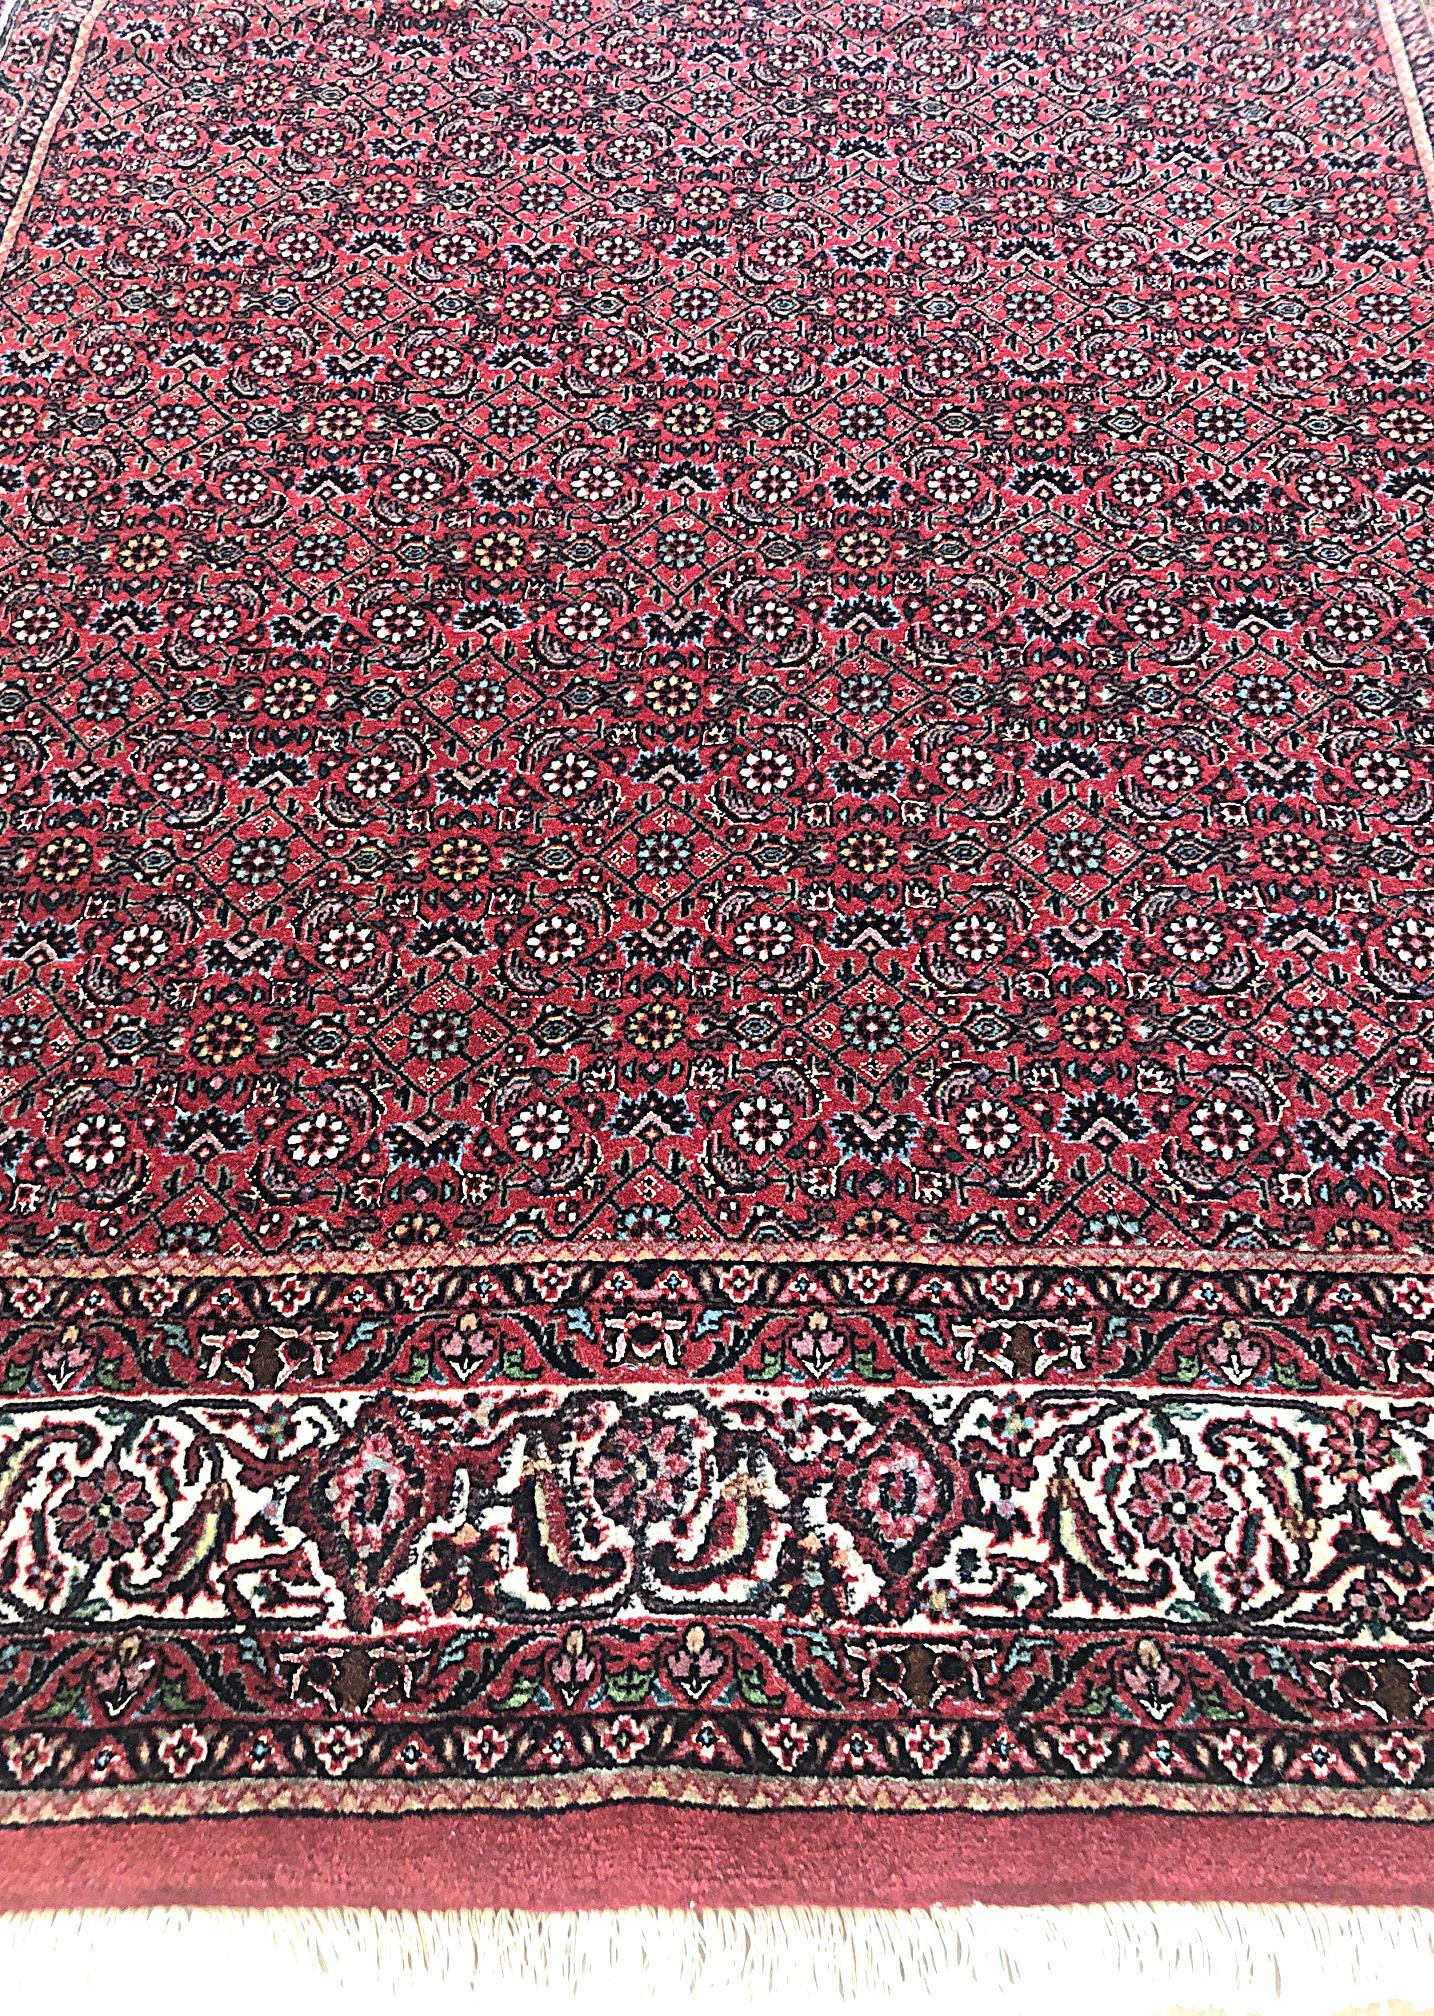 Hand-Knotted Persian Hand Knotted Red All-Over Floral Herati Design Bijar 'Bidjar' Rug